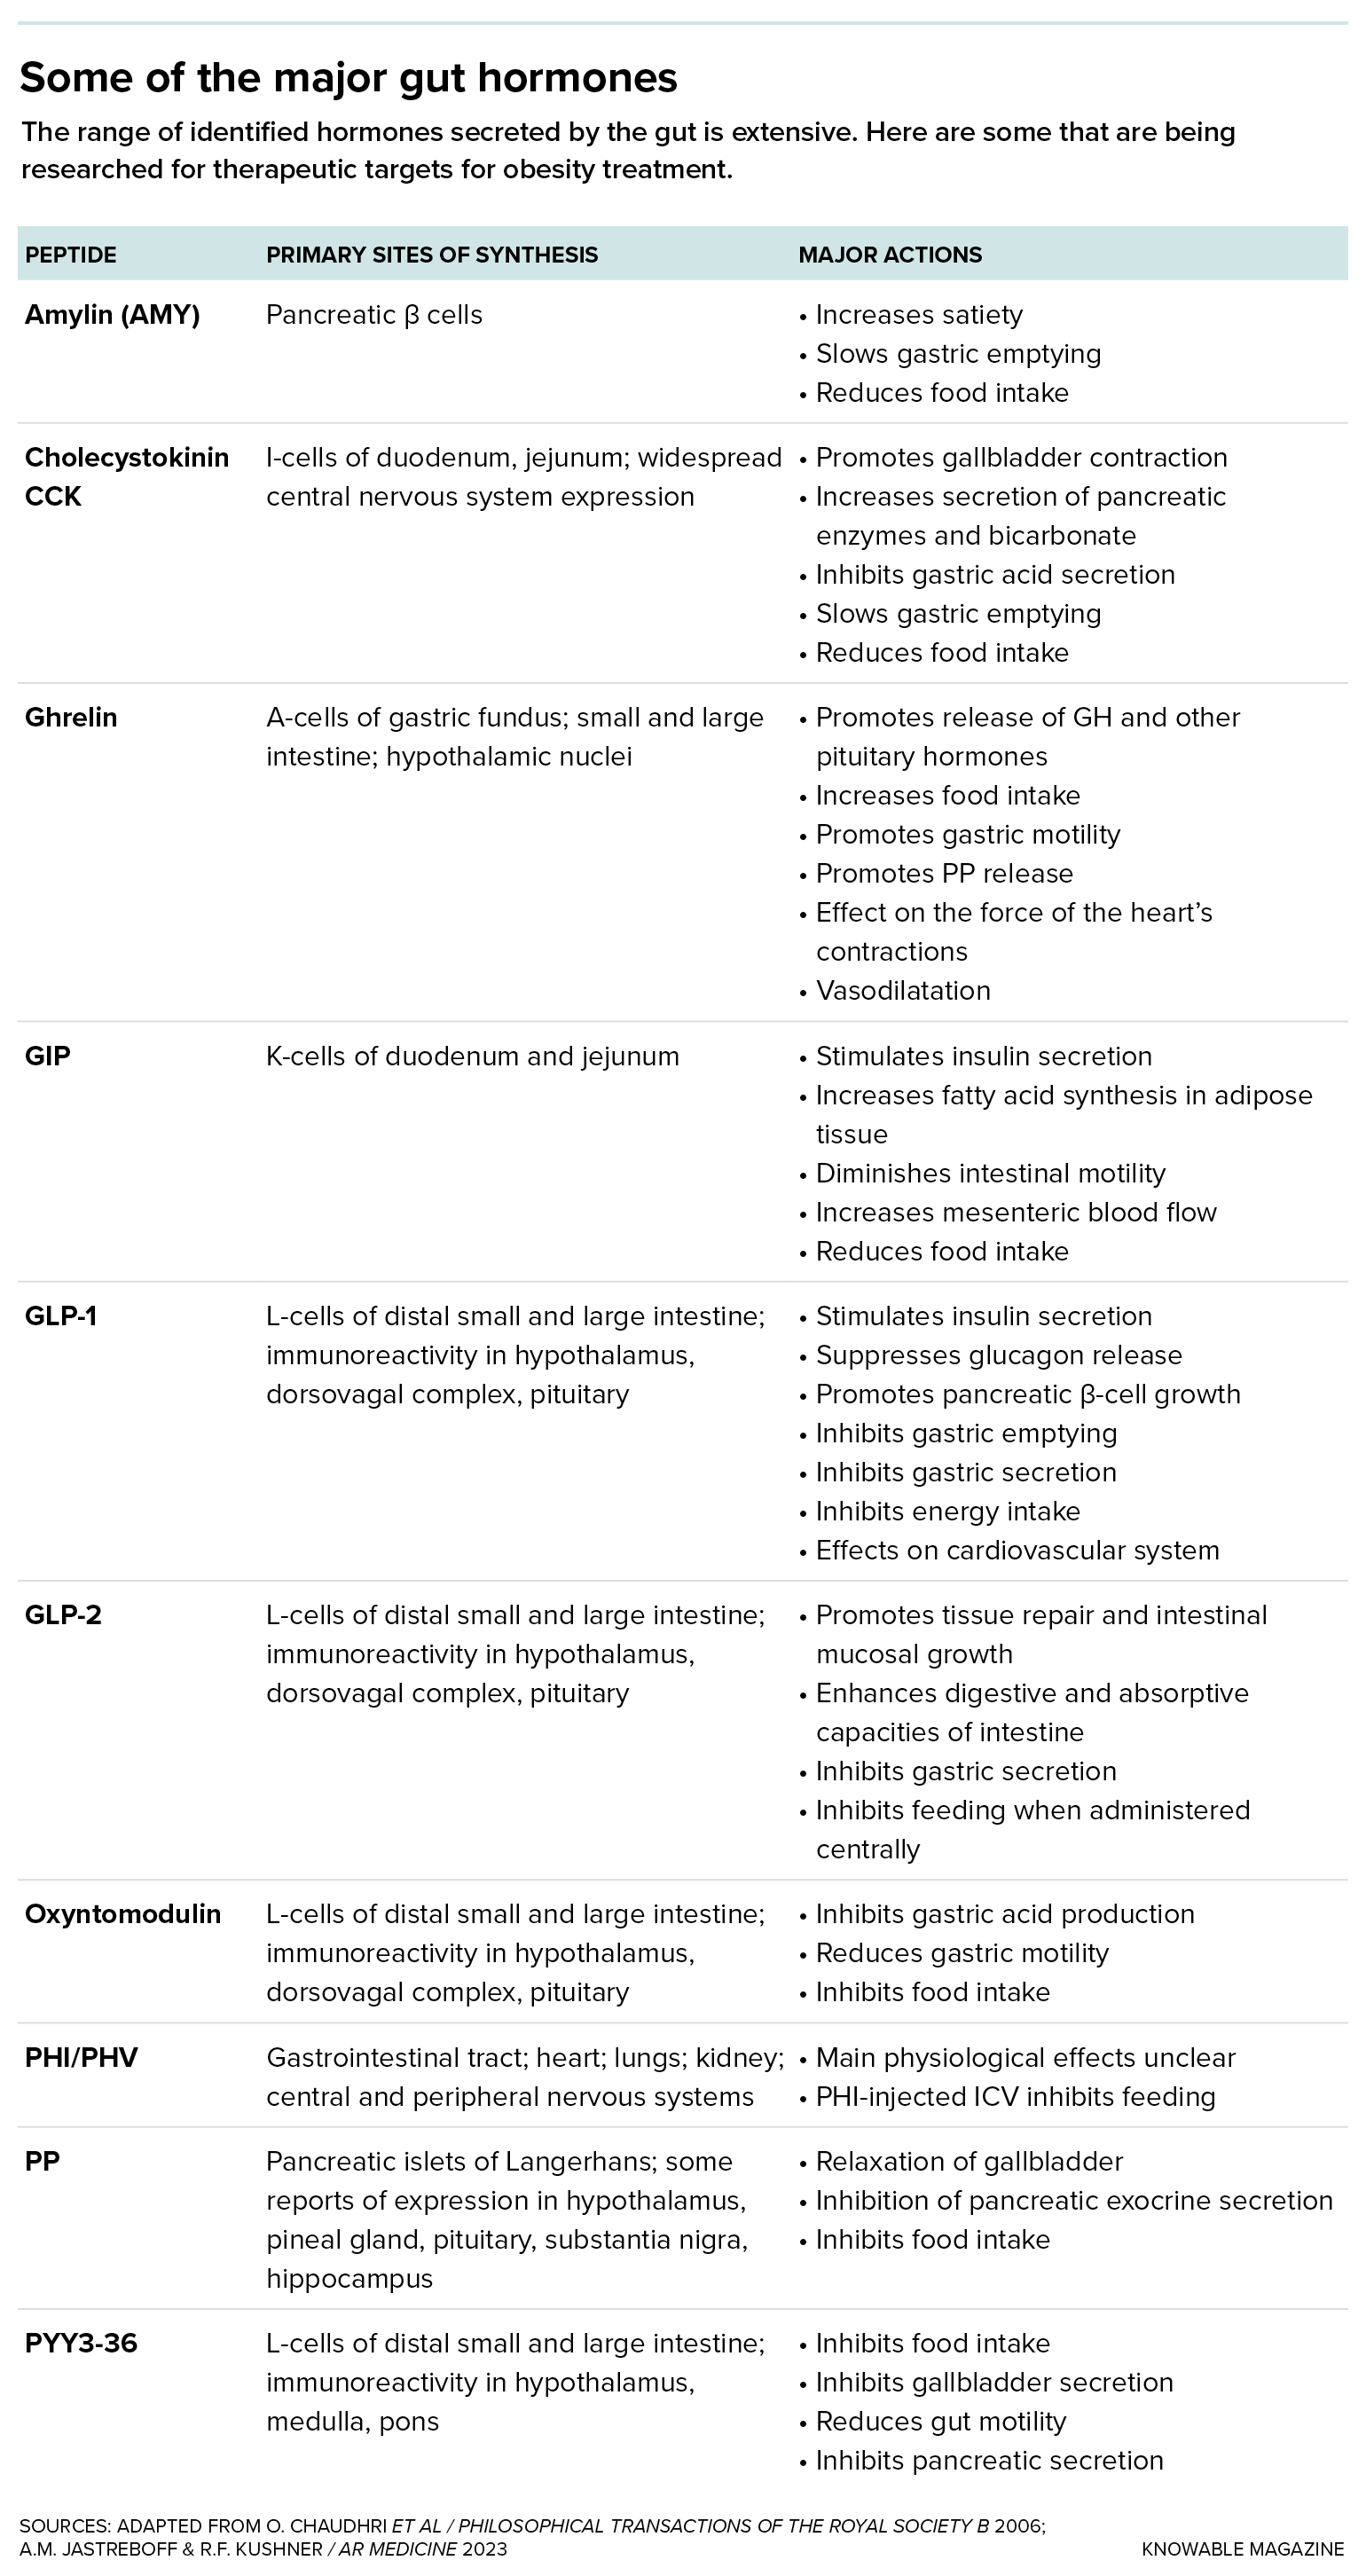 Table detailing some of the major gut hormones being investigated as possible treatments for obesity. The table indicates the sites of action of each of these ten hormones and their known effects.